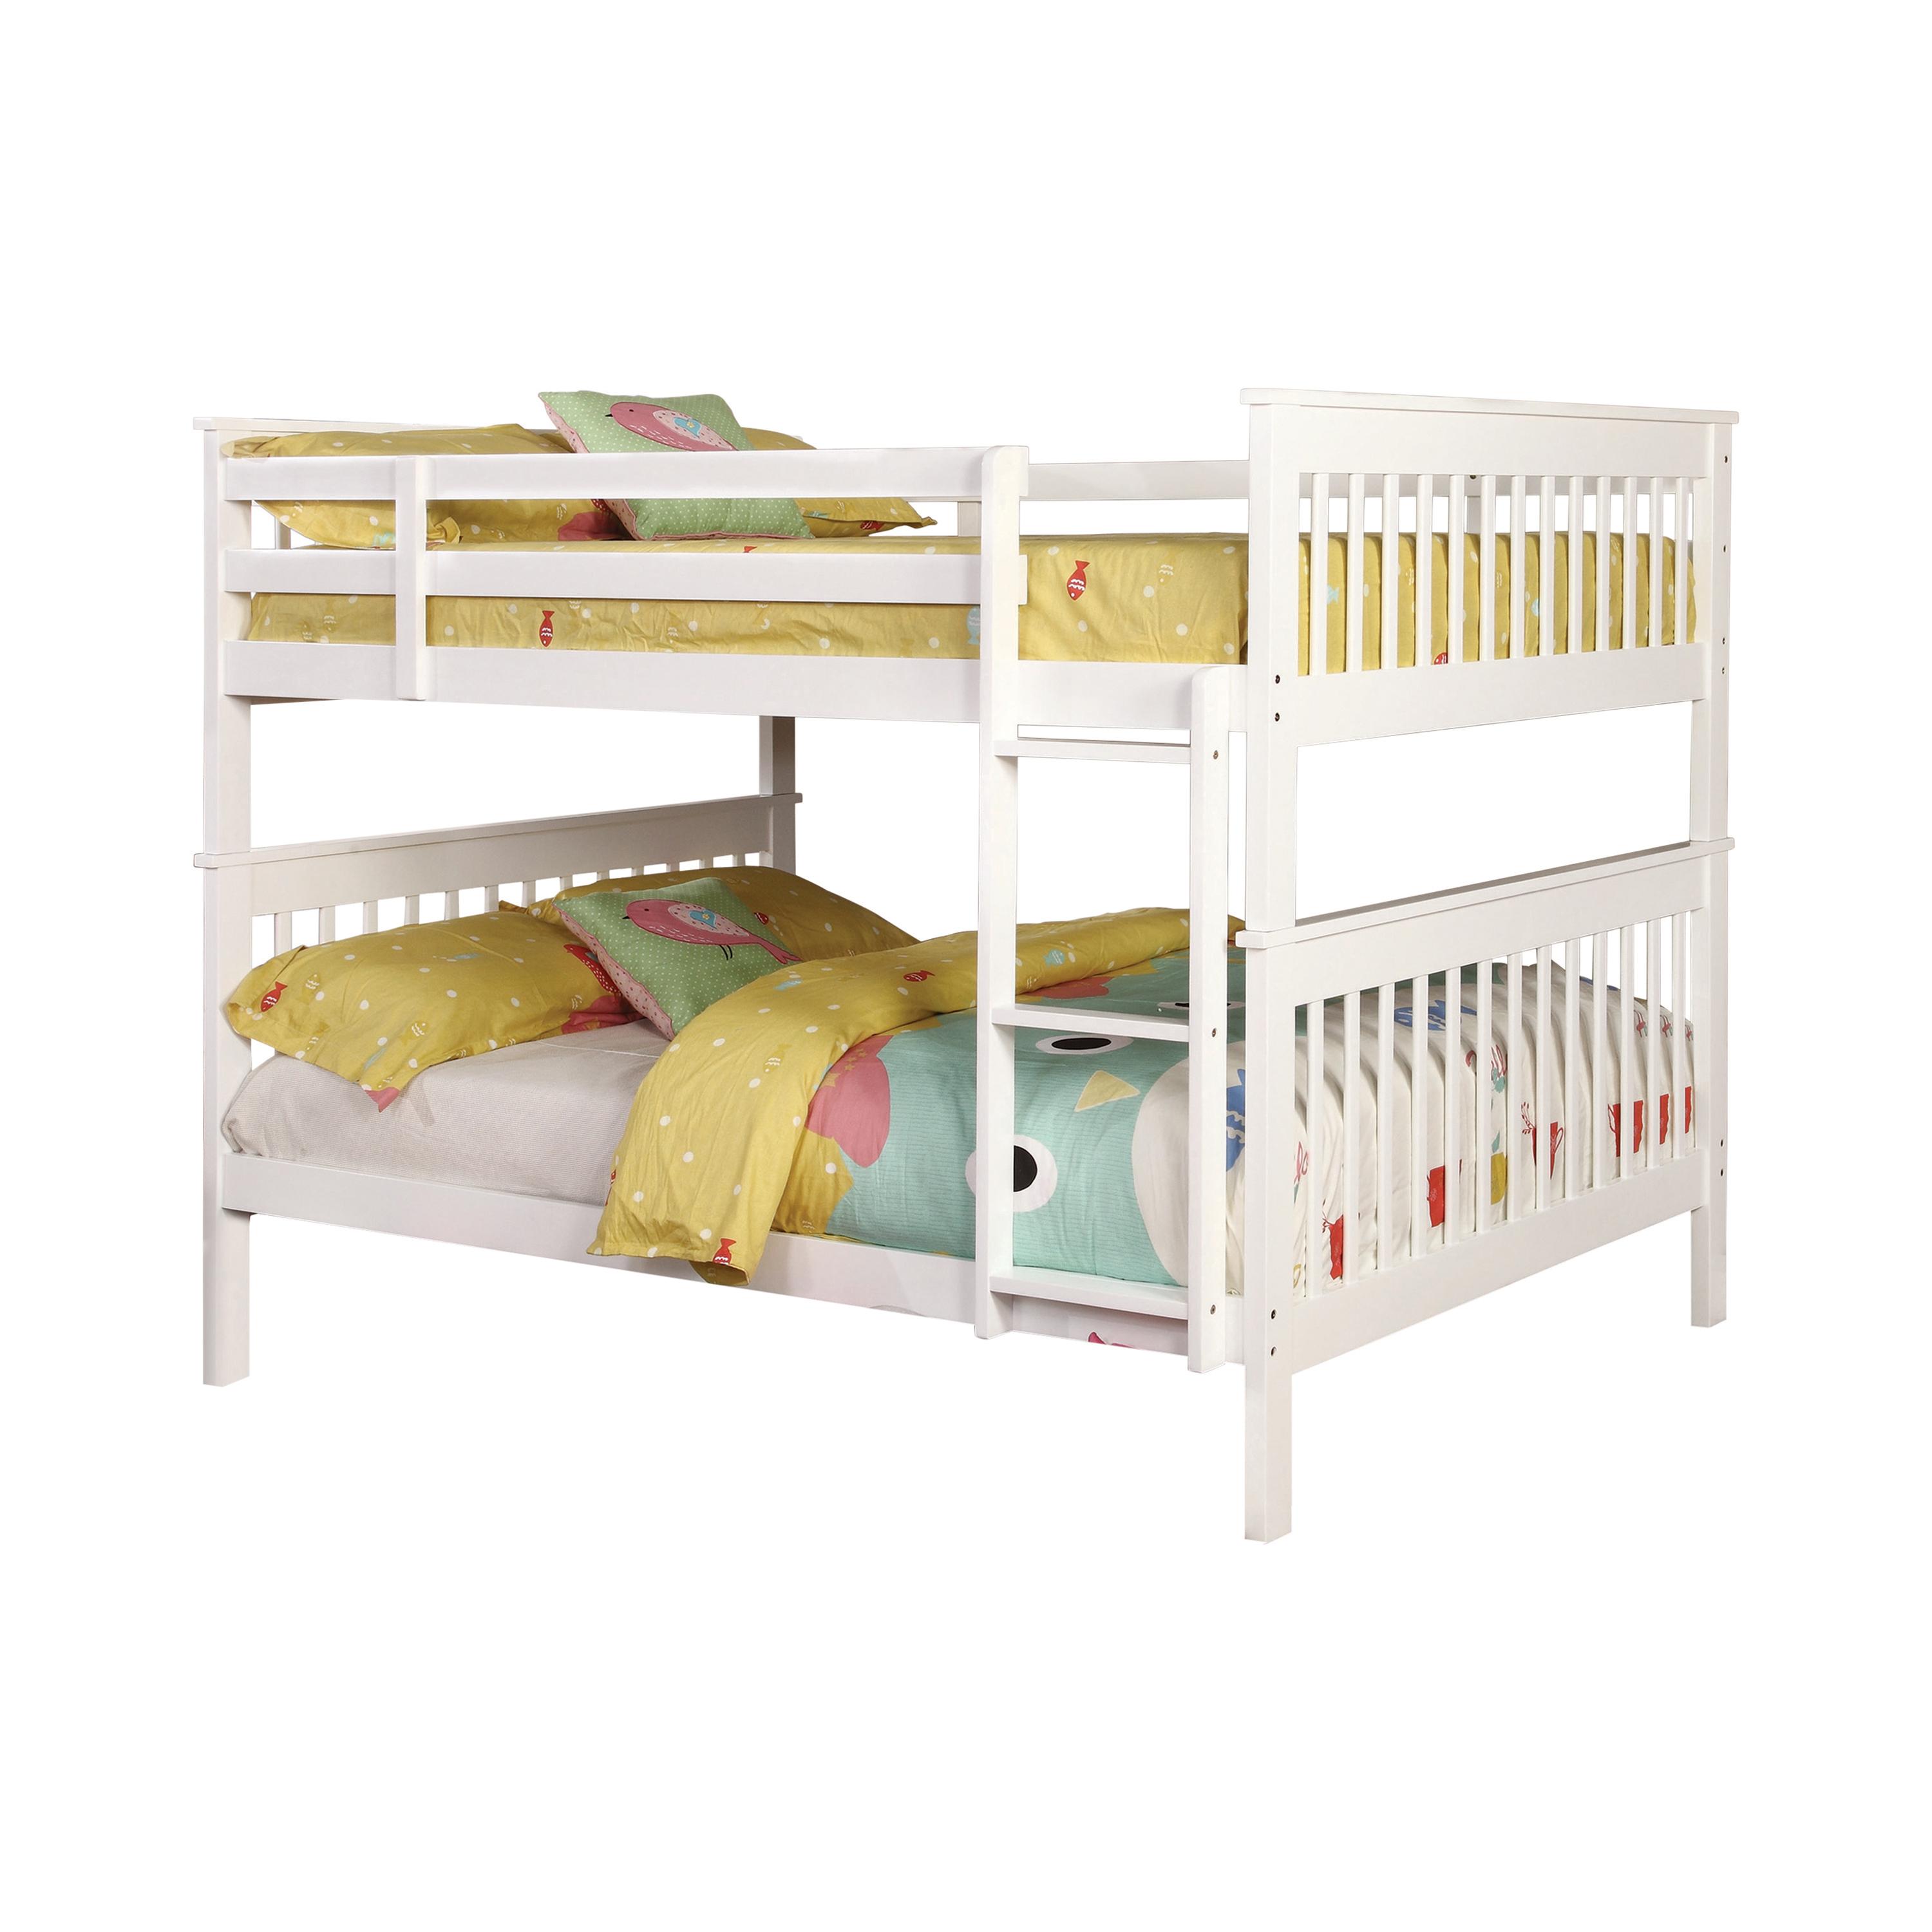 Contemporary Bunk Bed 460360 Chapman 460360 in White 